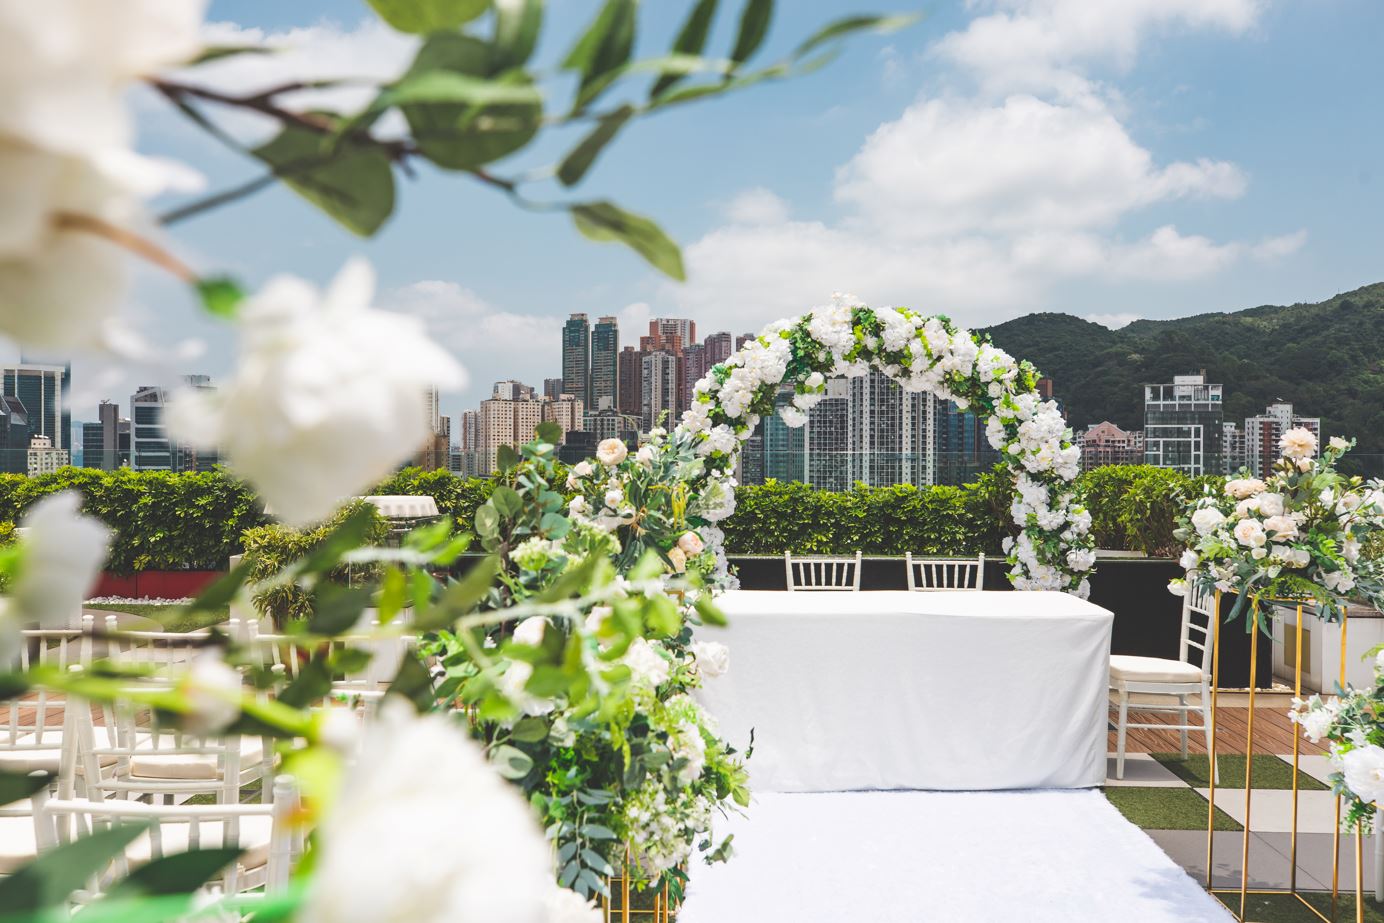 A wedding ceremony on the Rooftop Garden of the Park Lane Hong Kong